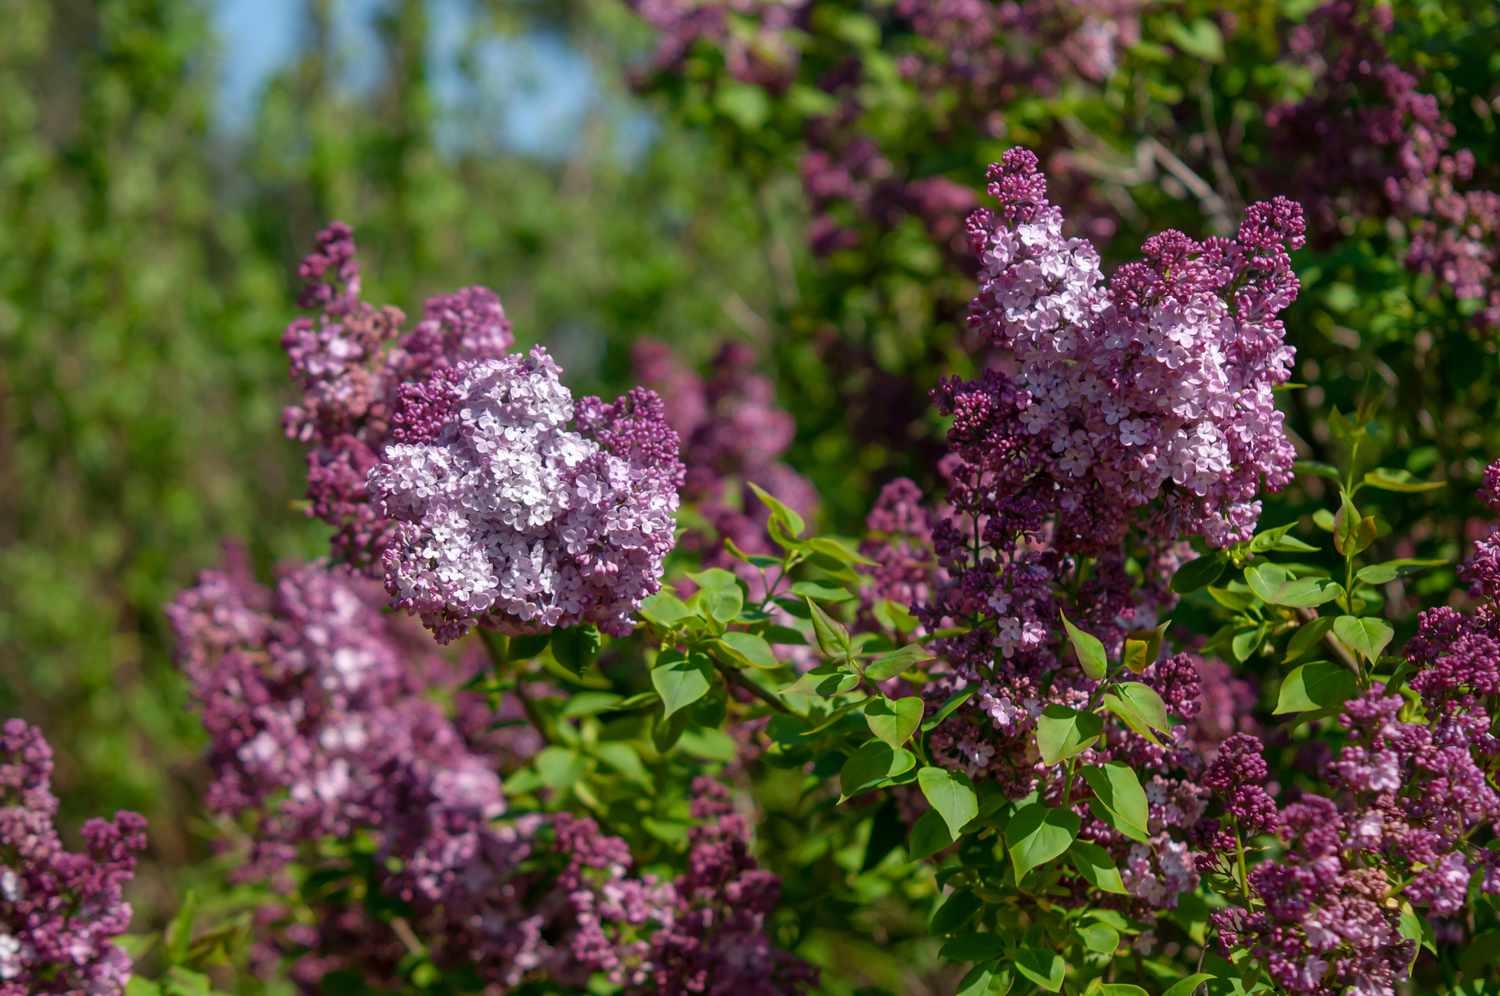 Maiden's blush lilac with redish-purple flowers 